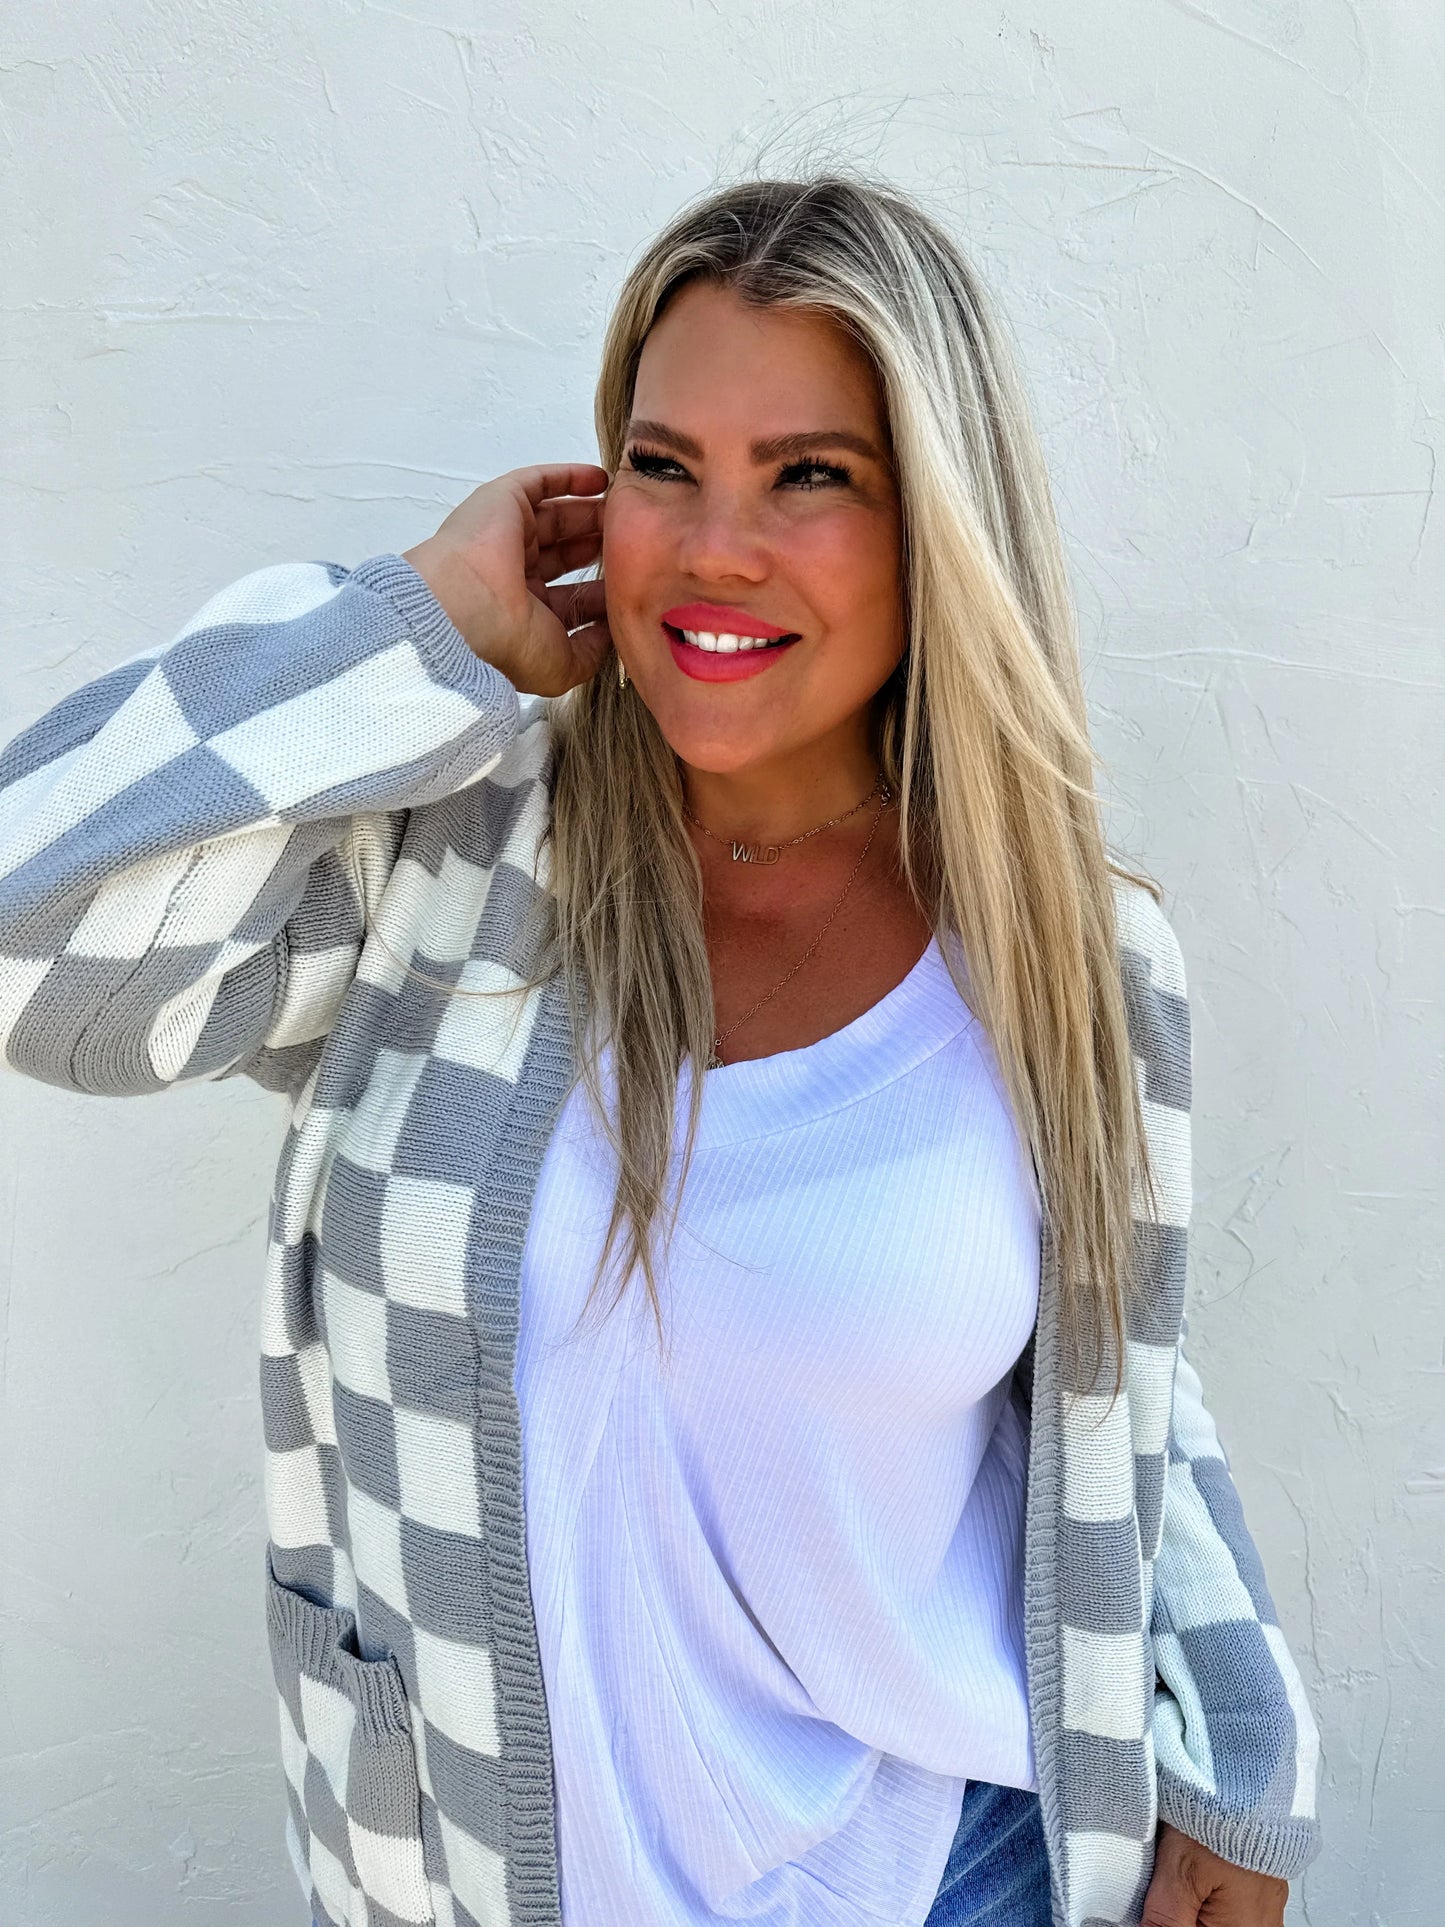 PREORDER: Beverly Checkered Cardigan in Four Colors